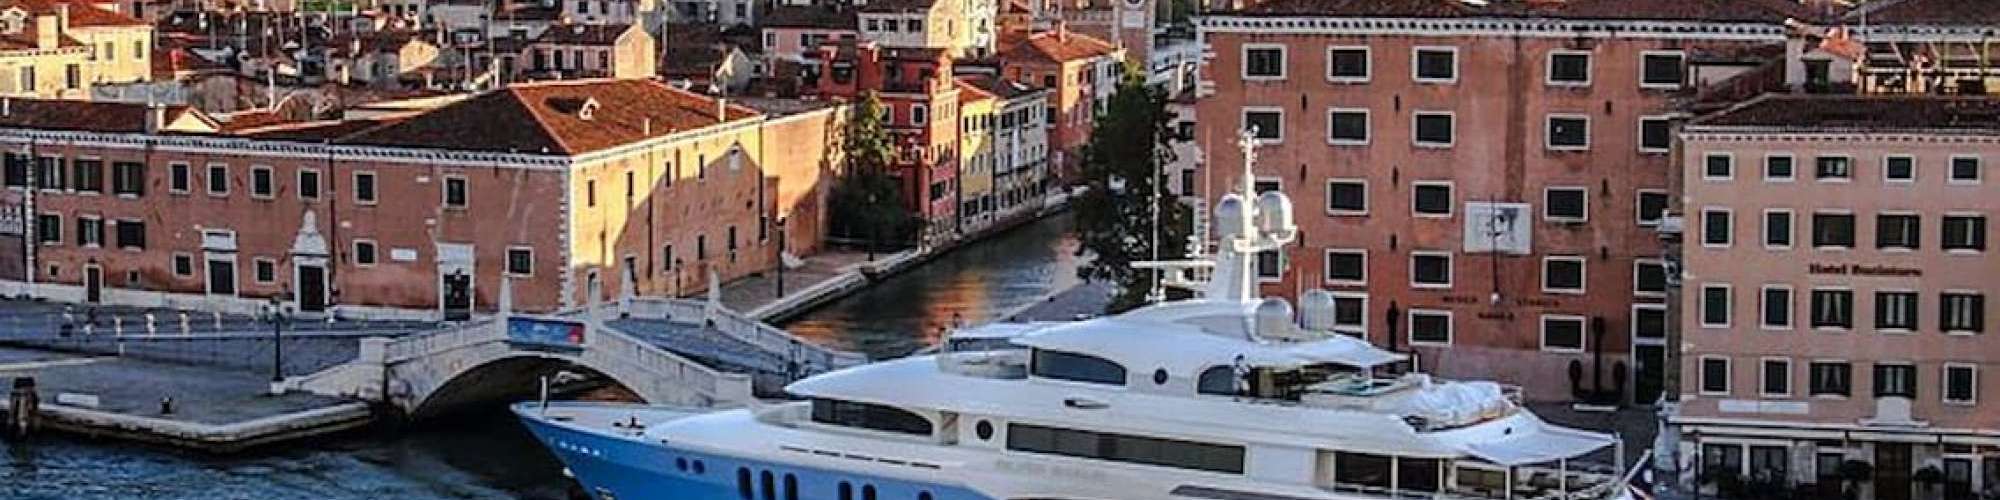 Five exclusive activities for yacht guests in Venice organized by MSA Yacht.